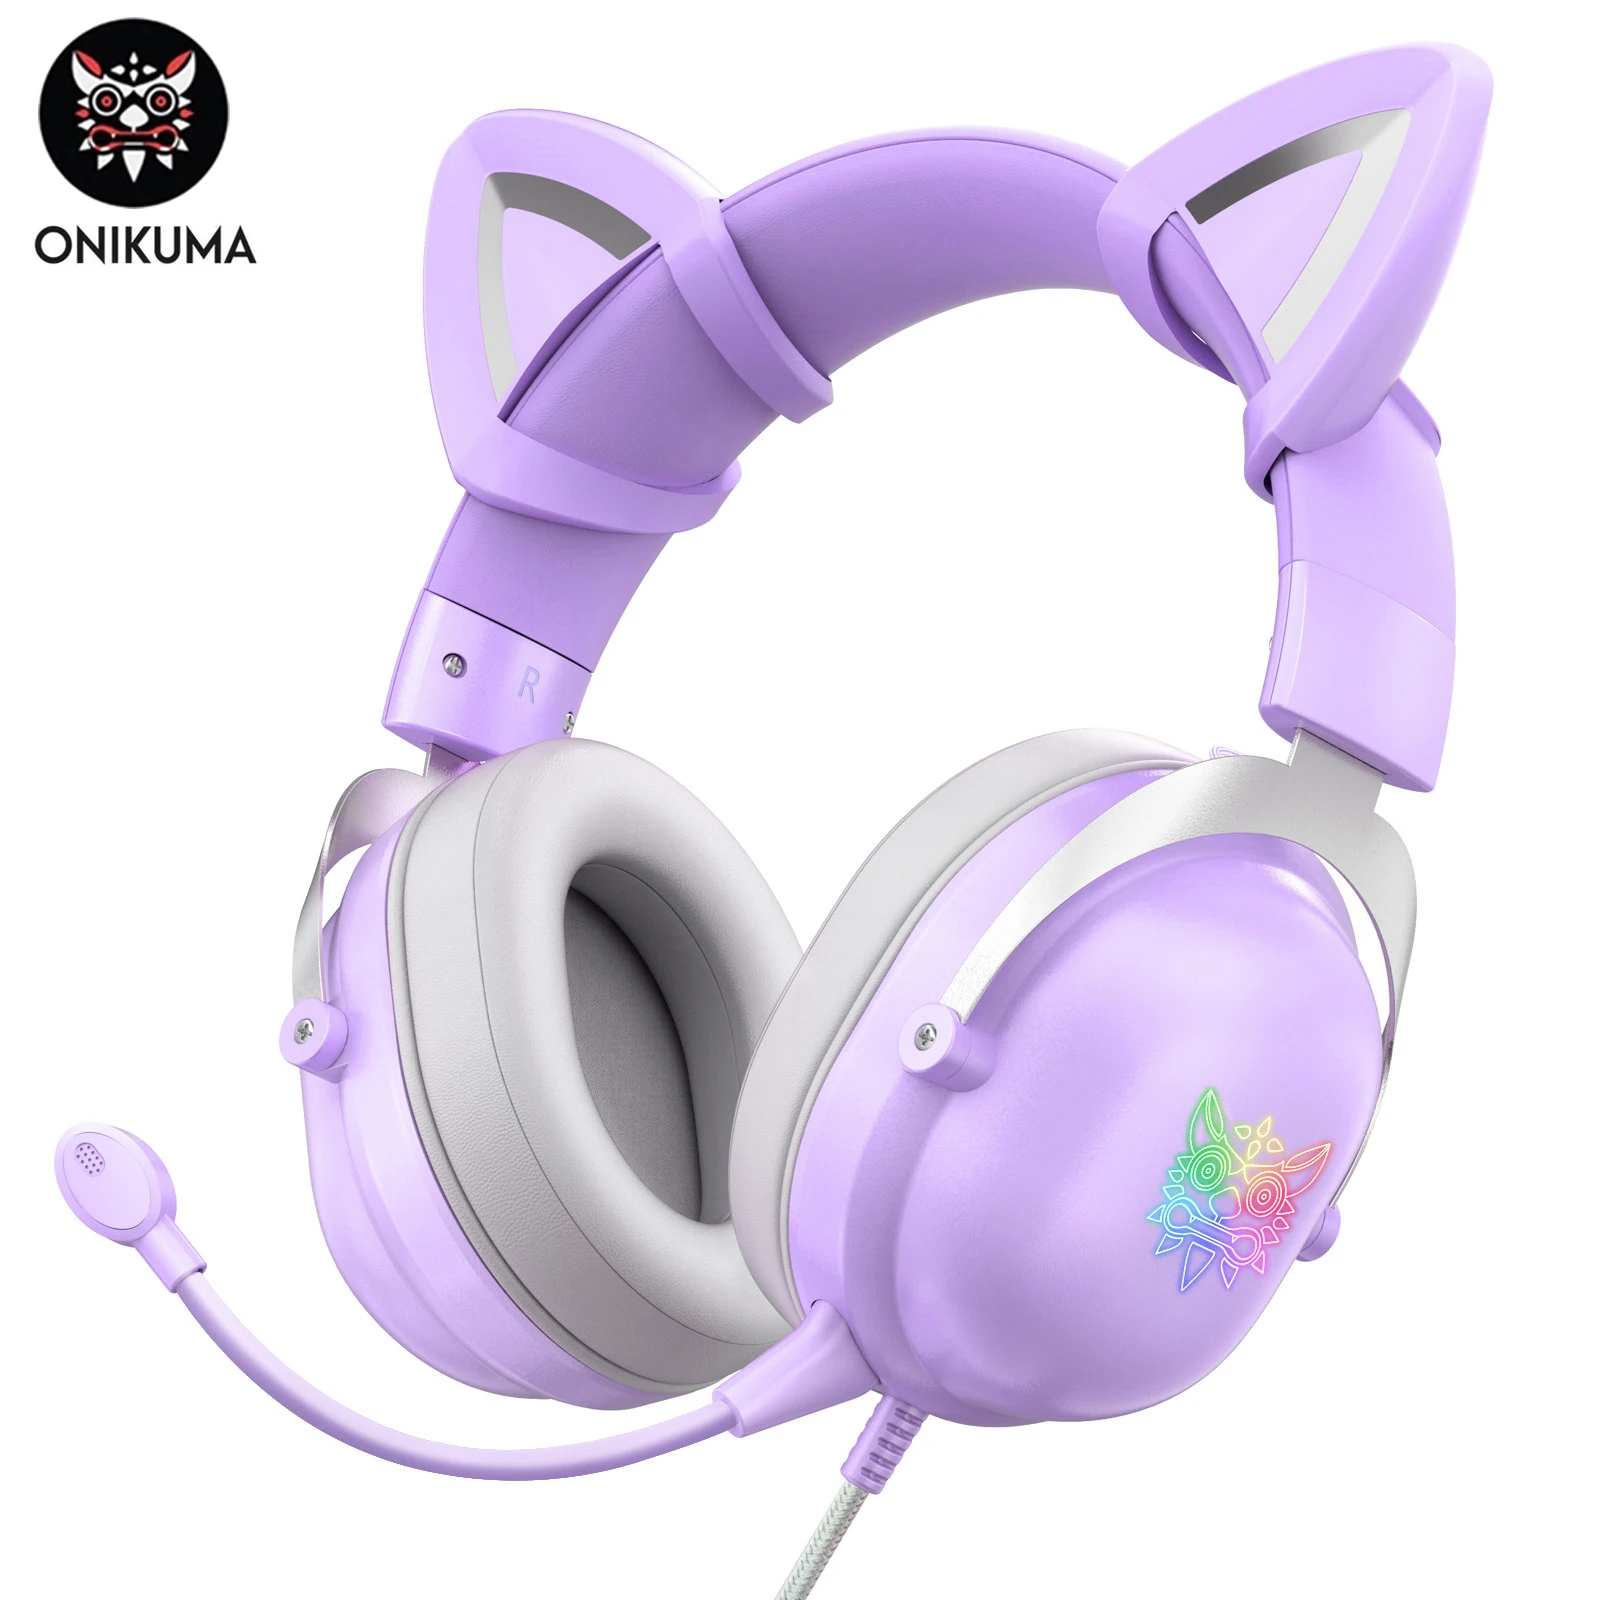 

ONIKUMA X11 PS4 Gaming Headset casque Wired PC Stereo Earphones Headphones with Microphone for New Xbox One/Laptop Tablet Gamer